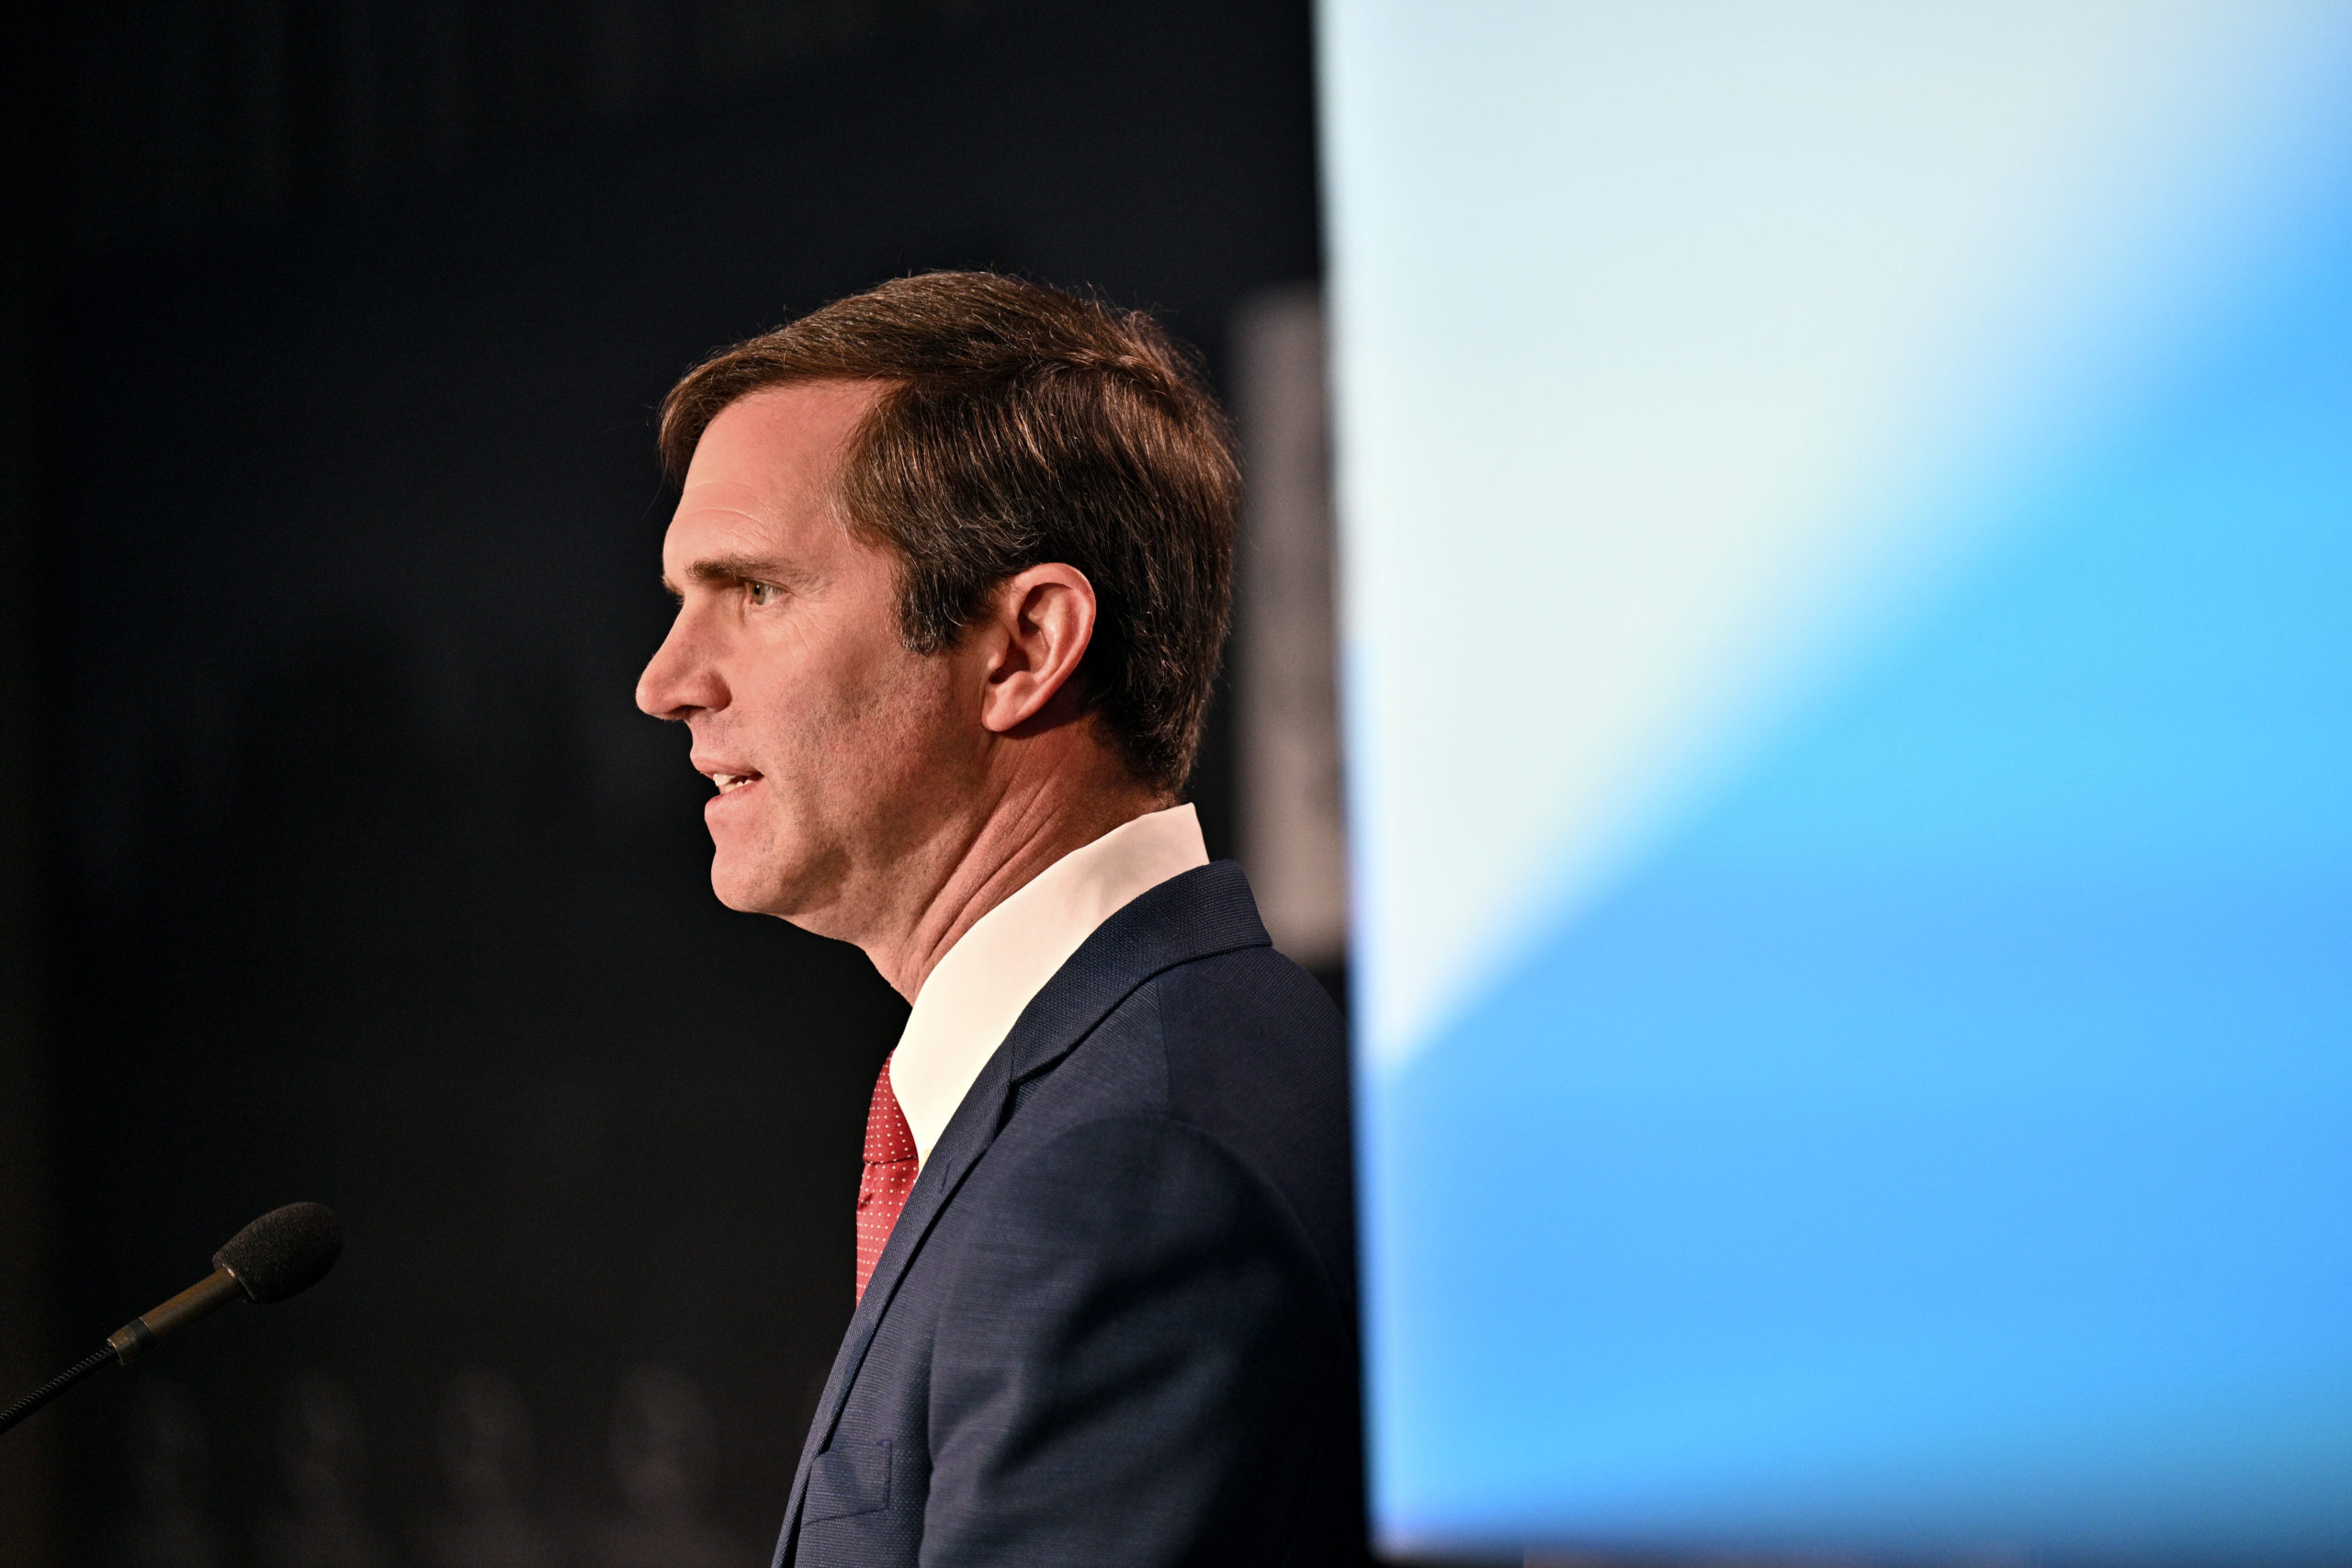 LEXINGTON, KENTUCKY - APRIL 08: Andy Beshear, Governor of Kentucky, Commonwealth of Kentucky, speaks onstage during the 2022 Concordia Lexington Summit - Day 2 at Lexington Marriott City Center on April 08, 2022 in Lexington, Kentucky. (Photo by Jon Cherry/Getty Images for Concordia )